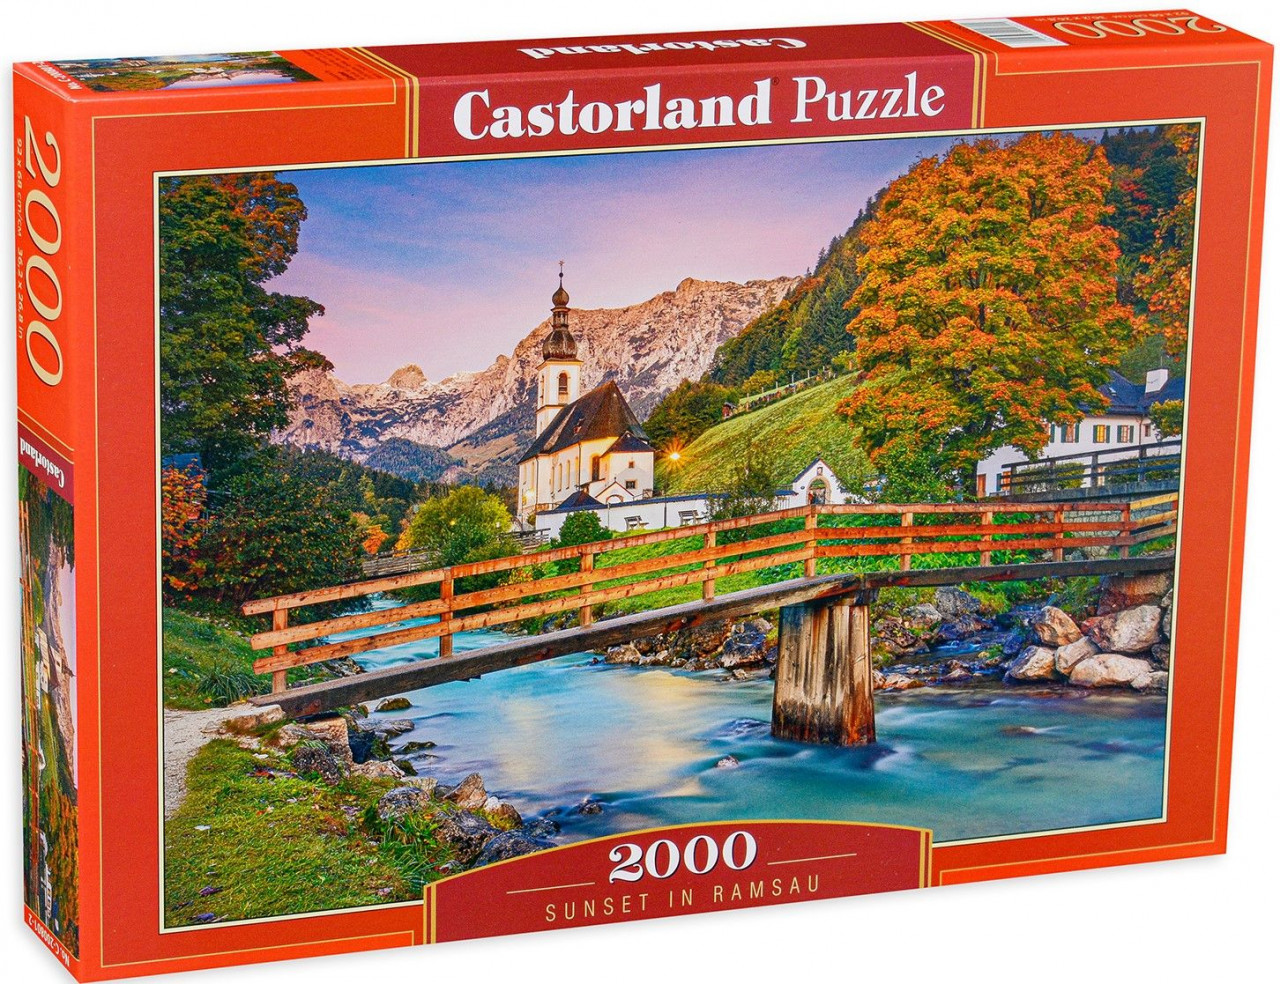 Relatively break Recommendation Puzzle 2000 Piese - Sunset In Ramsau - Castorland